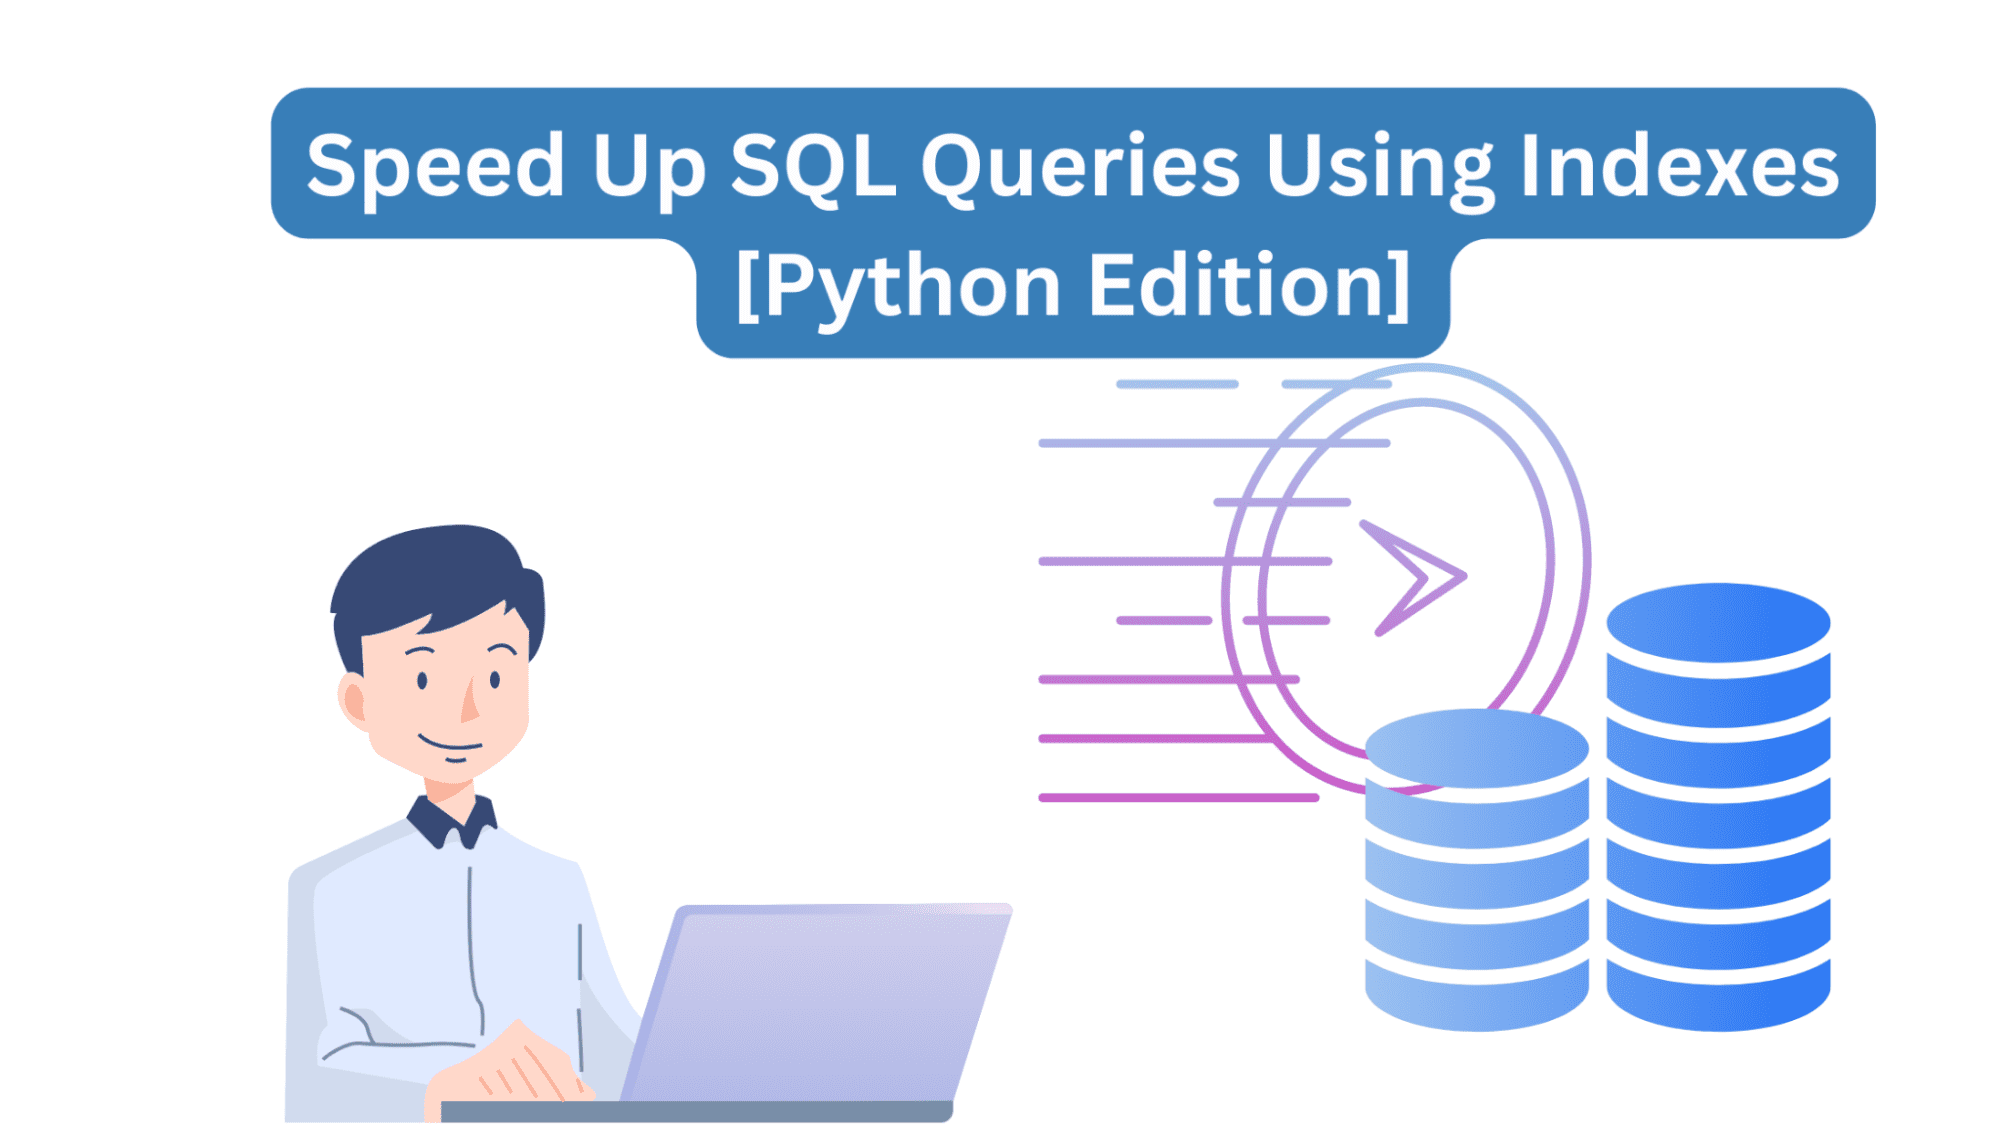 How To Speed Up SQL Queries Using Indexes [Python Edition]